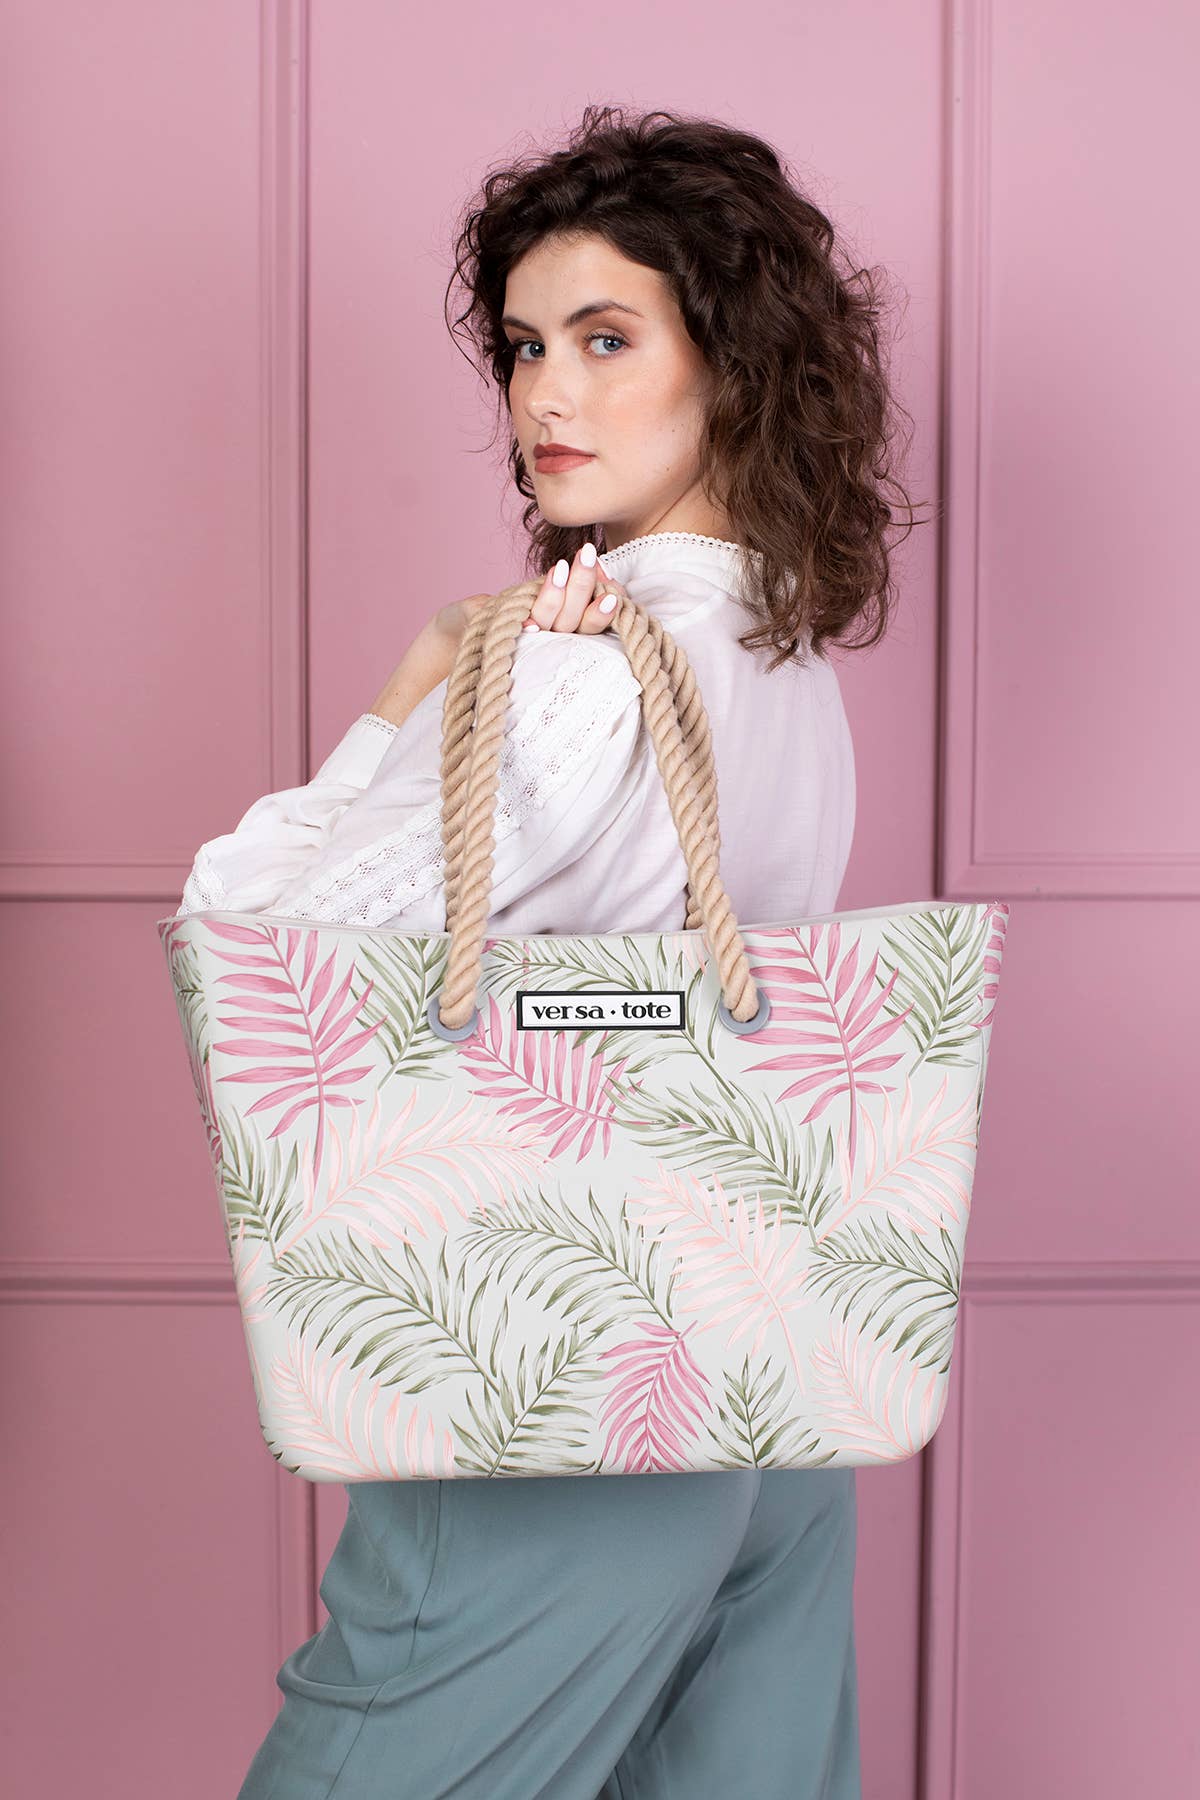 Carrie All Printed Versa Tote w/ Straps